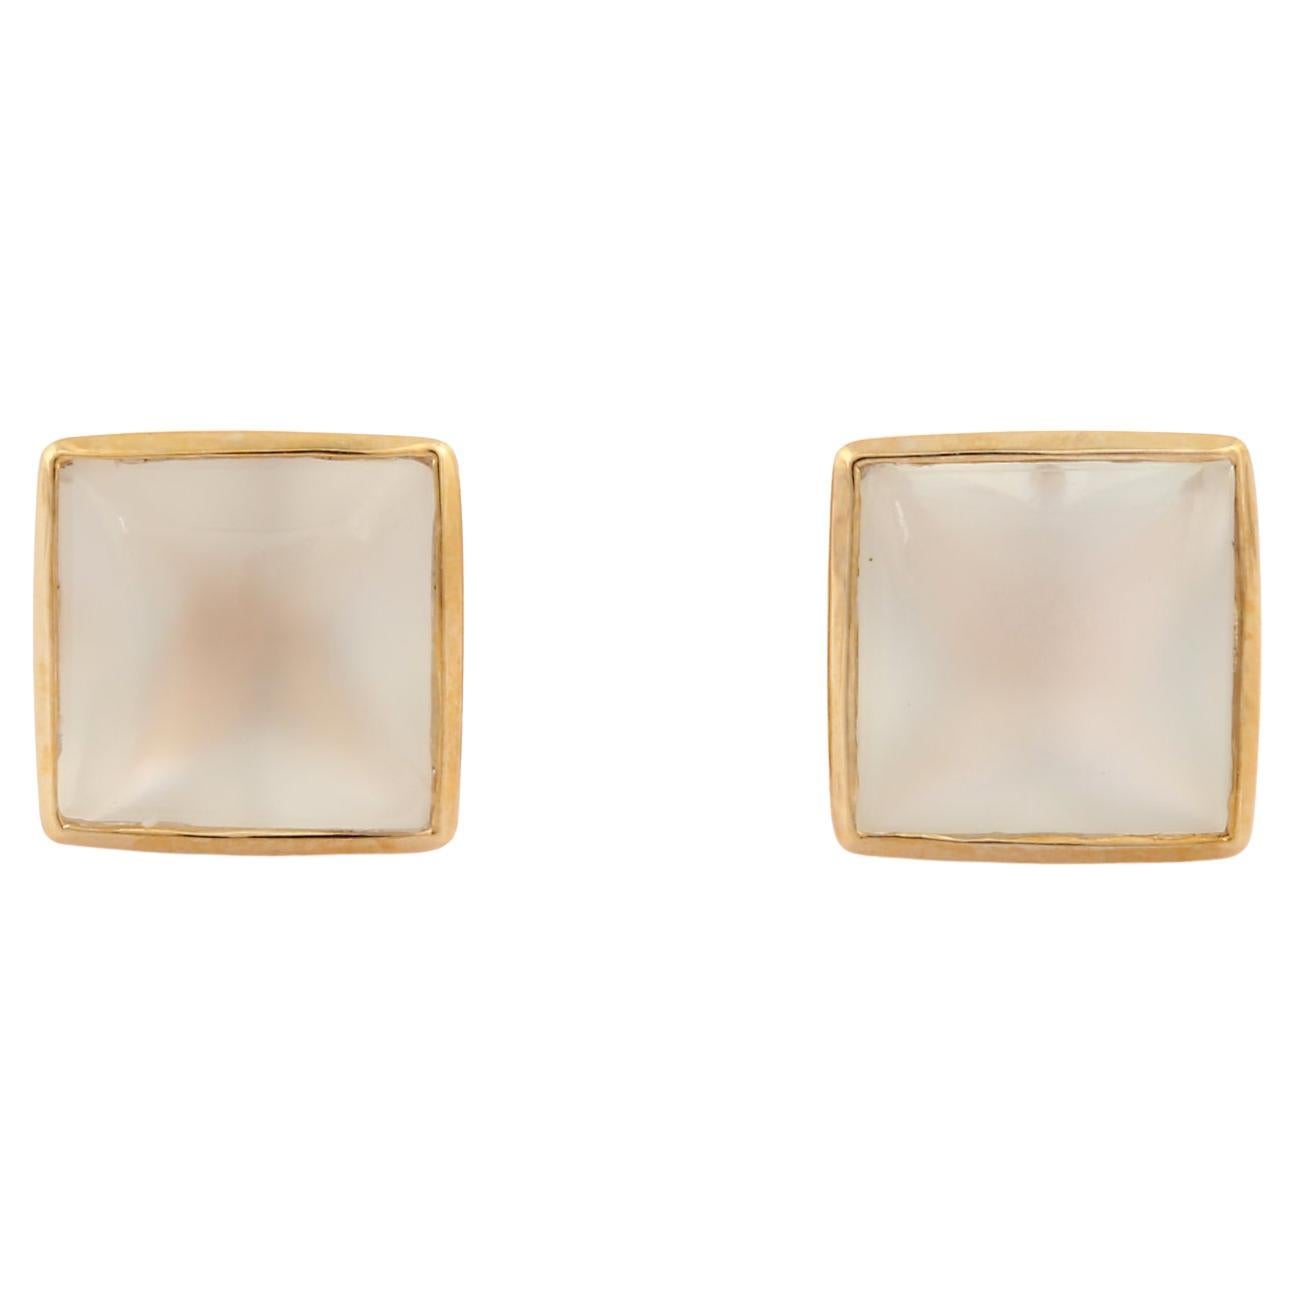 Minimal Rose Moonstone Square Ringed In 14K Yellow Gold Everyday Stud Earrings